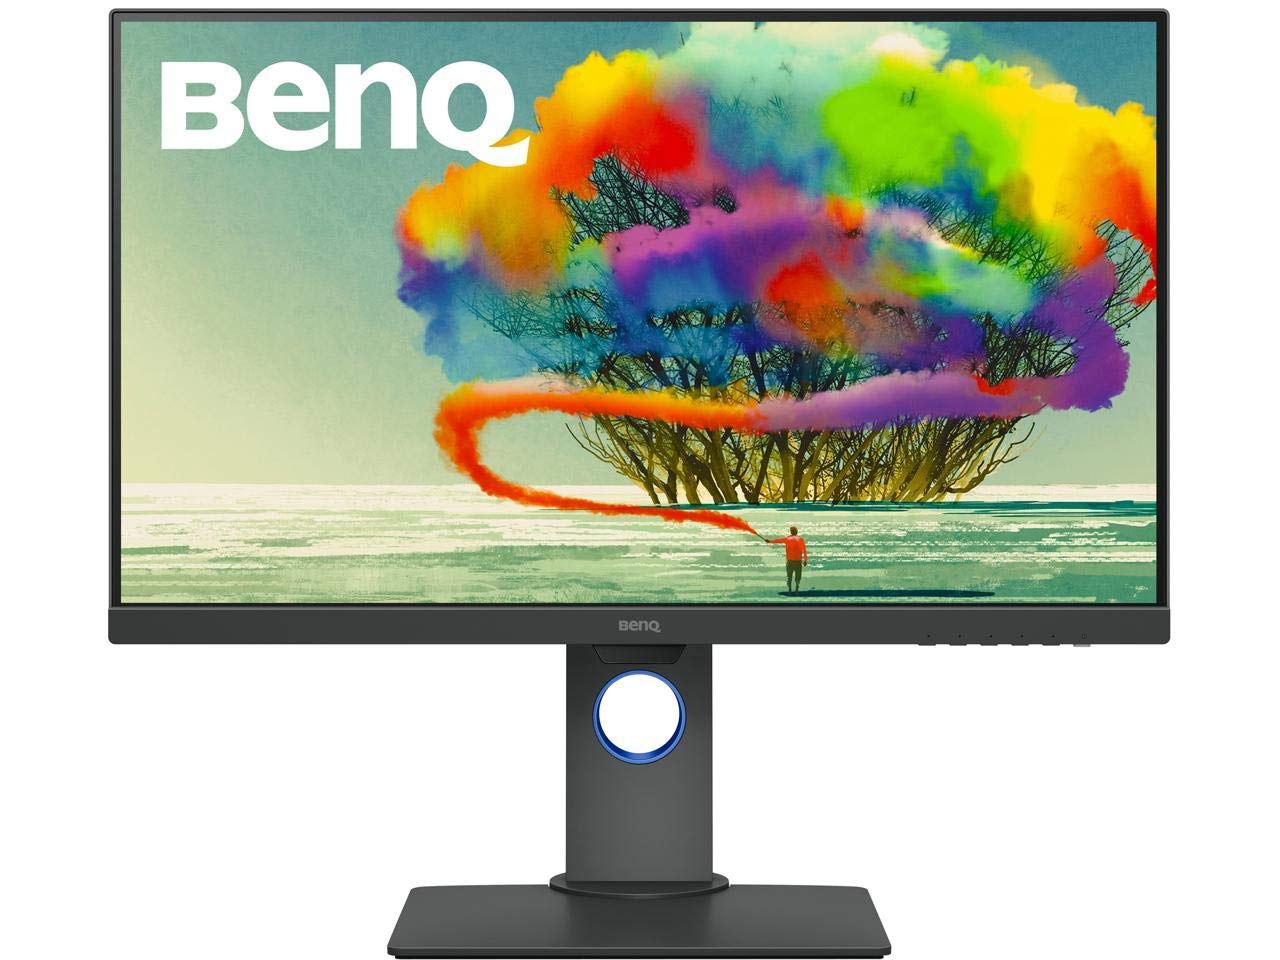 BenQ PD2705Q 27 Inch 2K QHD IPS Factory Calibrated Computer Monitor for Graphic Design and Video Editing, 100% sRGB, DualView, USB-C with 65W Power Delivery, Daisy Chain, HDR10 and CAD/CAM